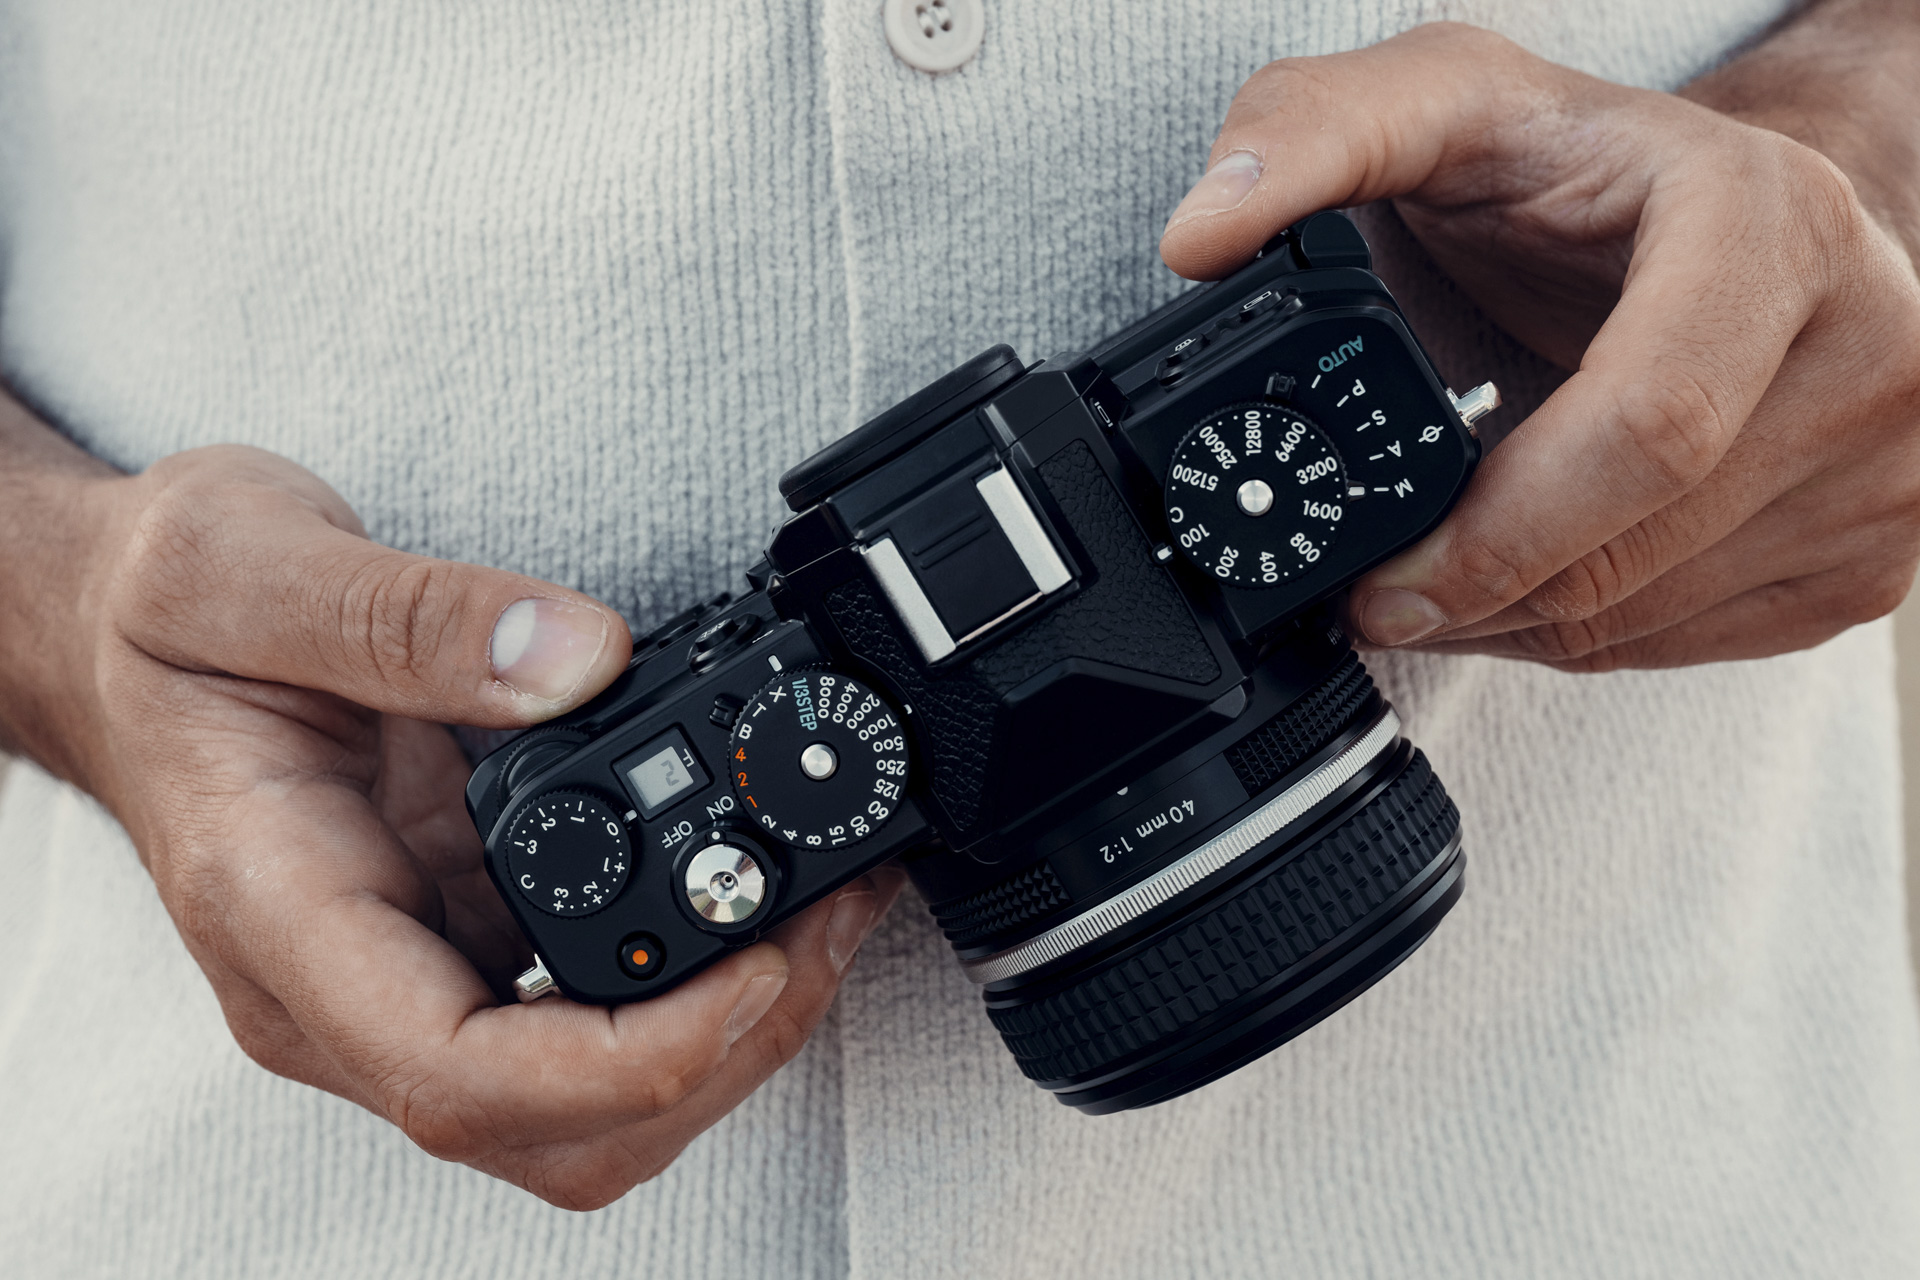 Nikon Z f in photographer's hand, view of the retro top plate